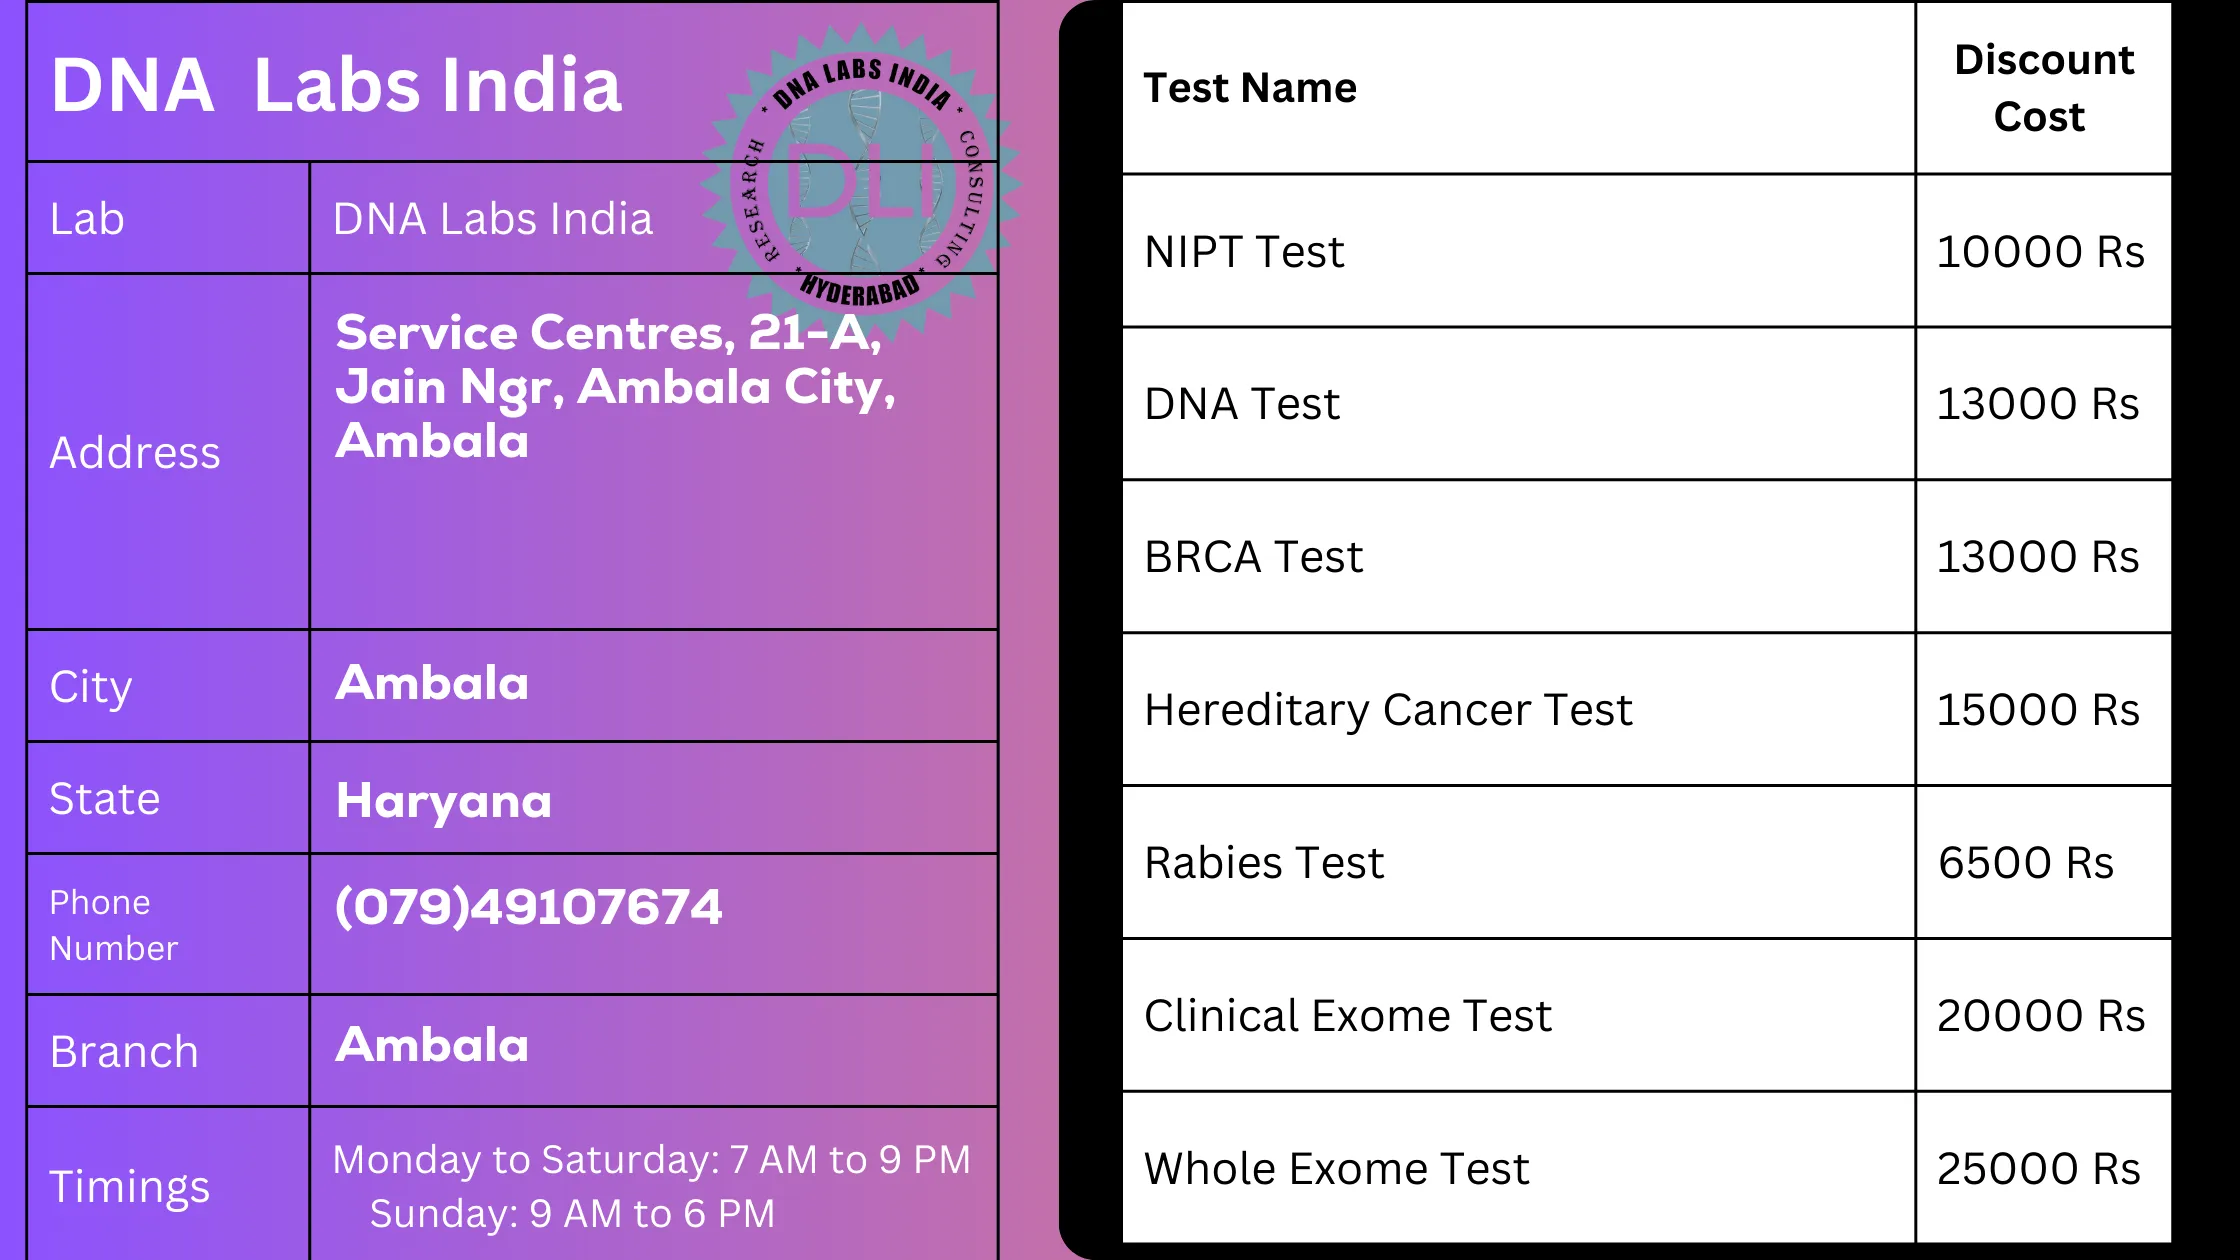 DNA Labs India in Ambala: Get 20% Off on Genetic Tests